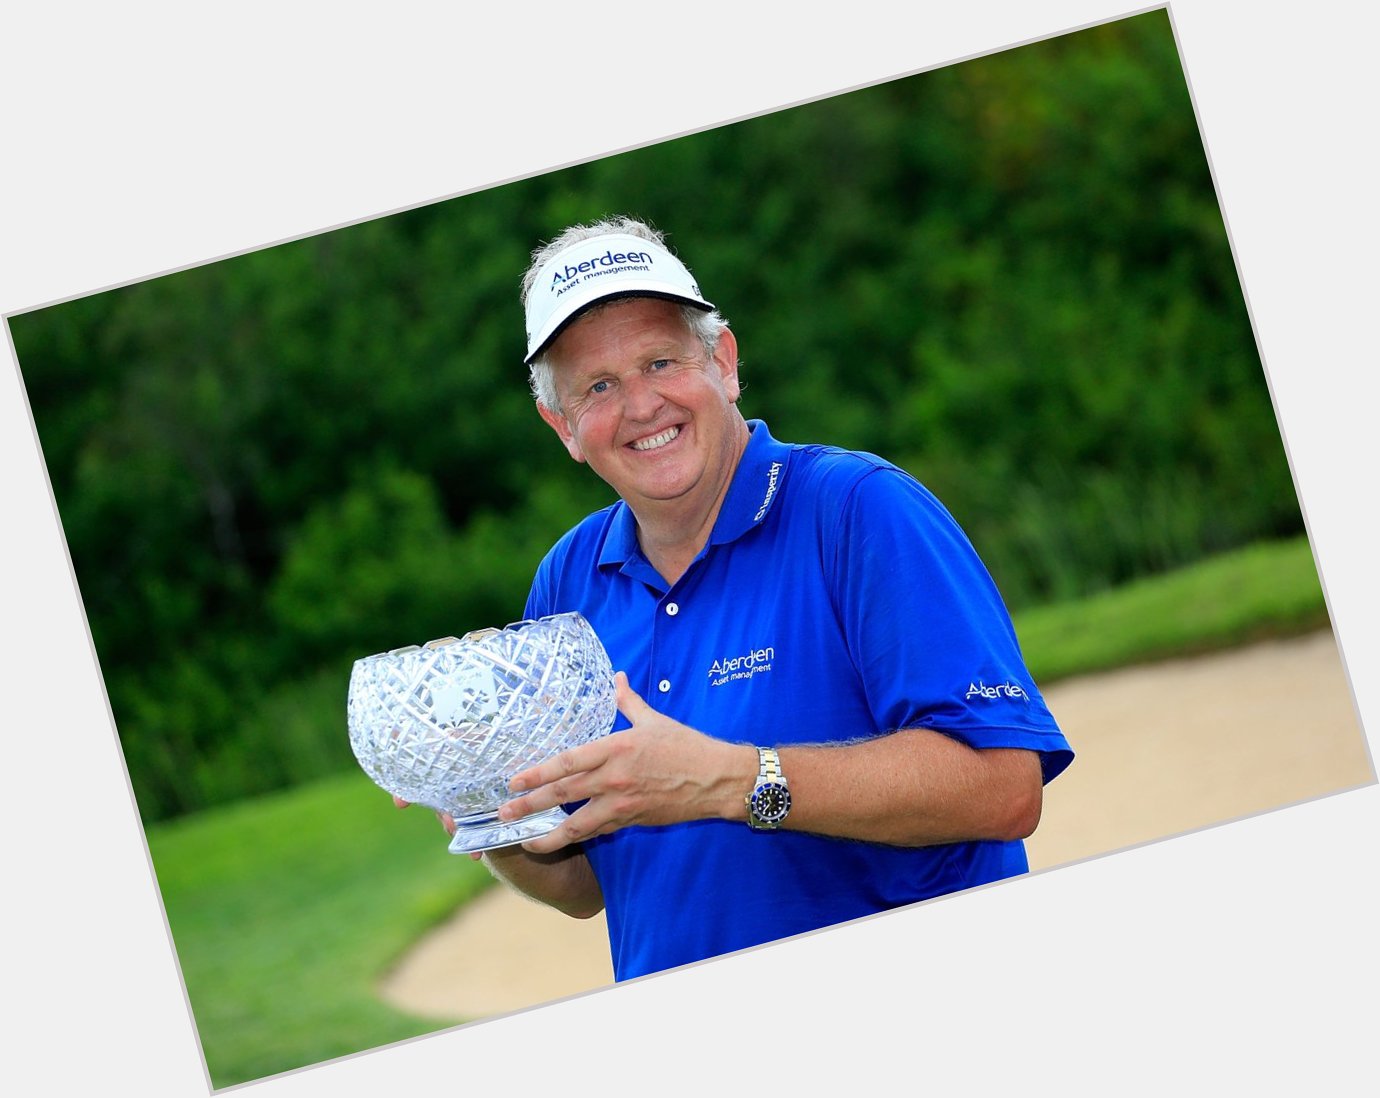 Happy 54th Birthday to three-time Senior Major Champion and two-time John Jacobs Trophy winner Colin Montgomerie 